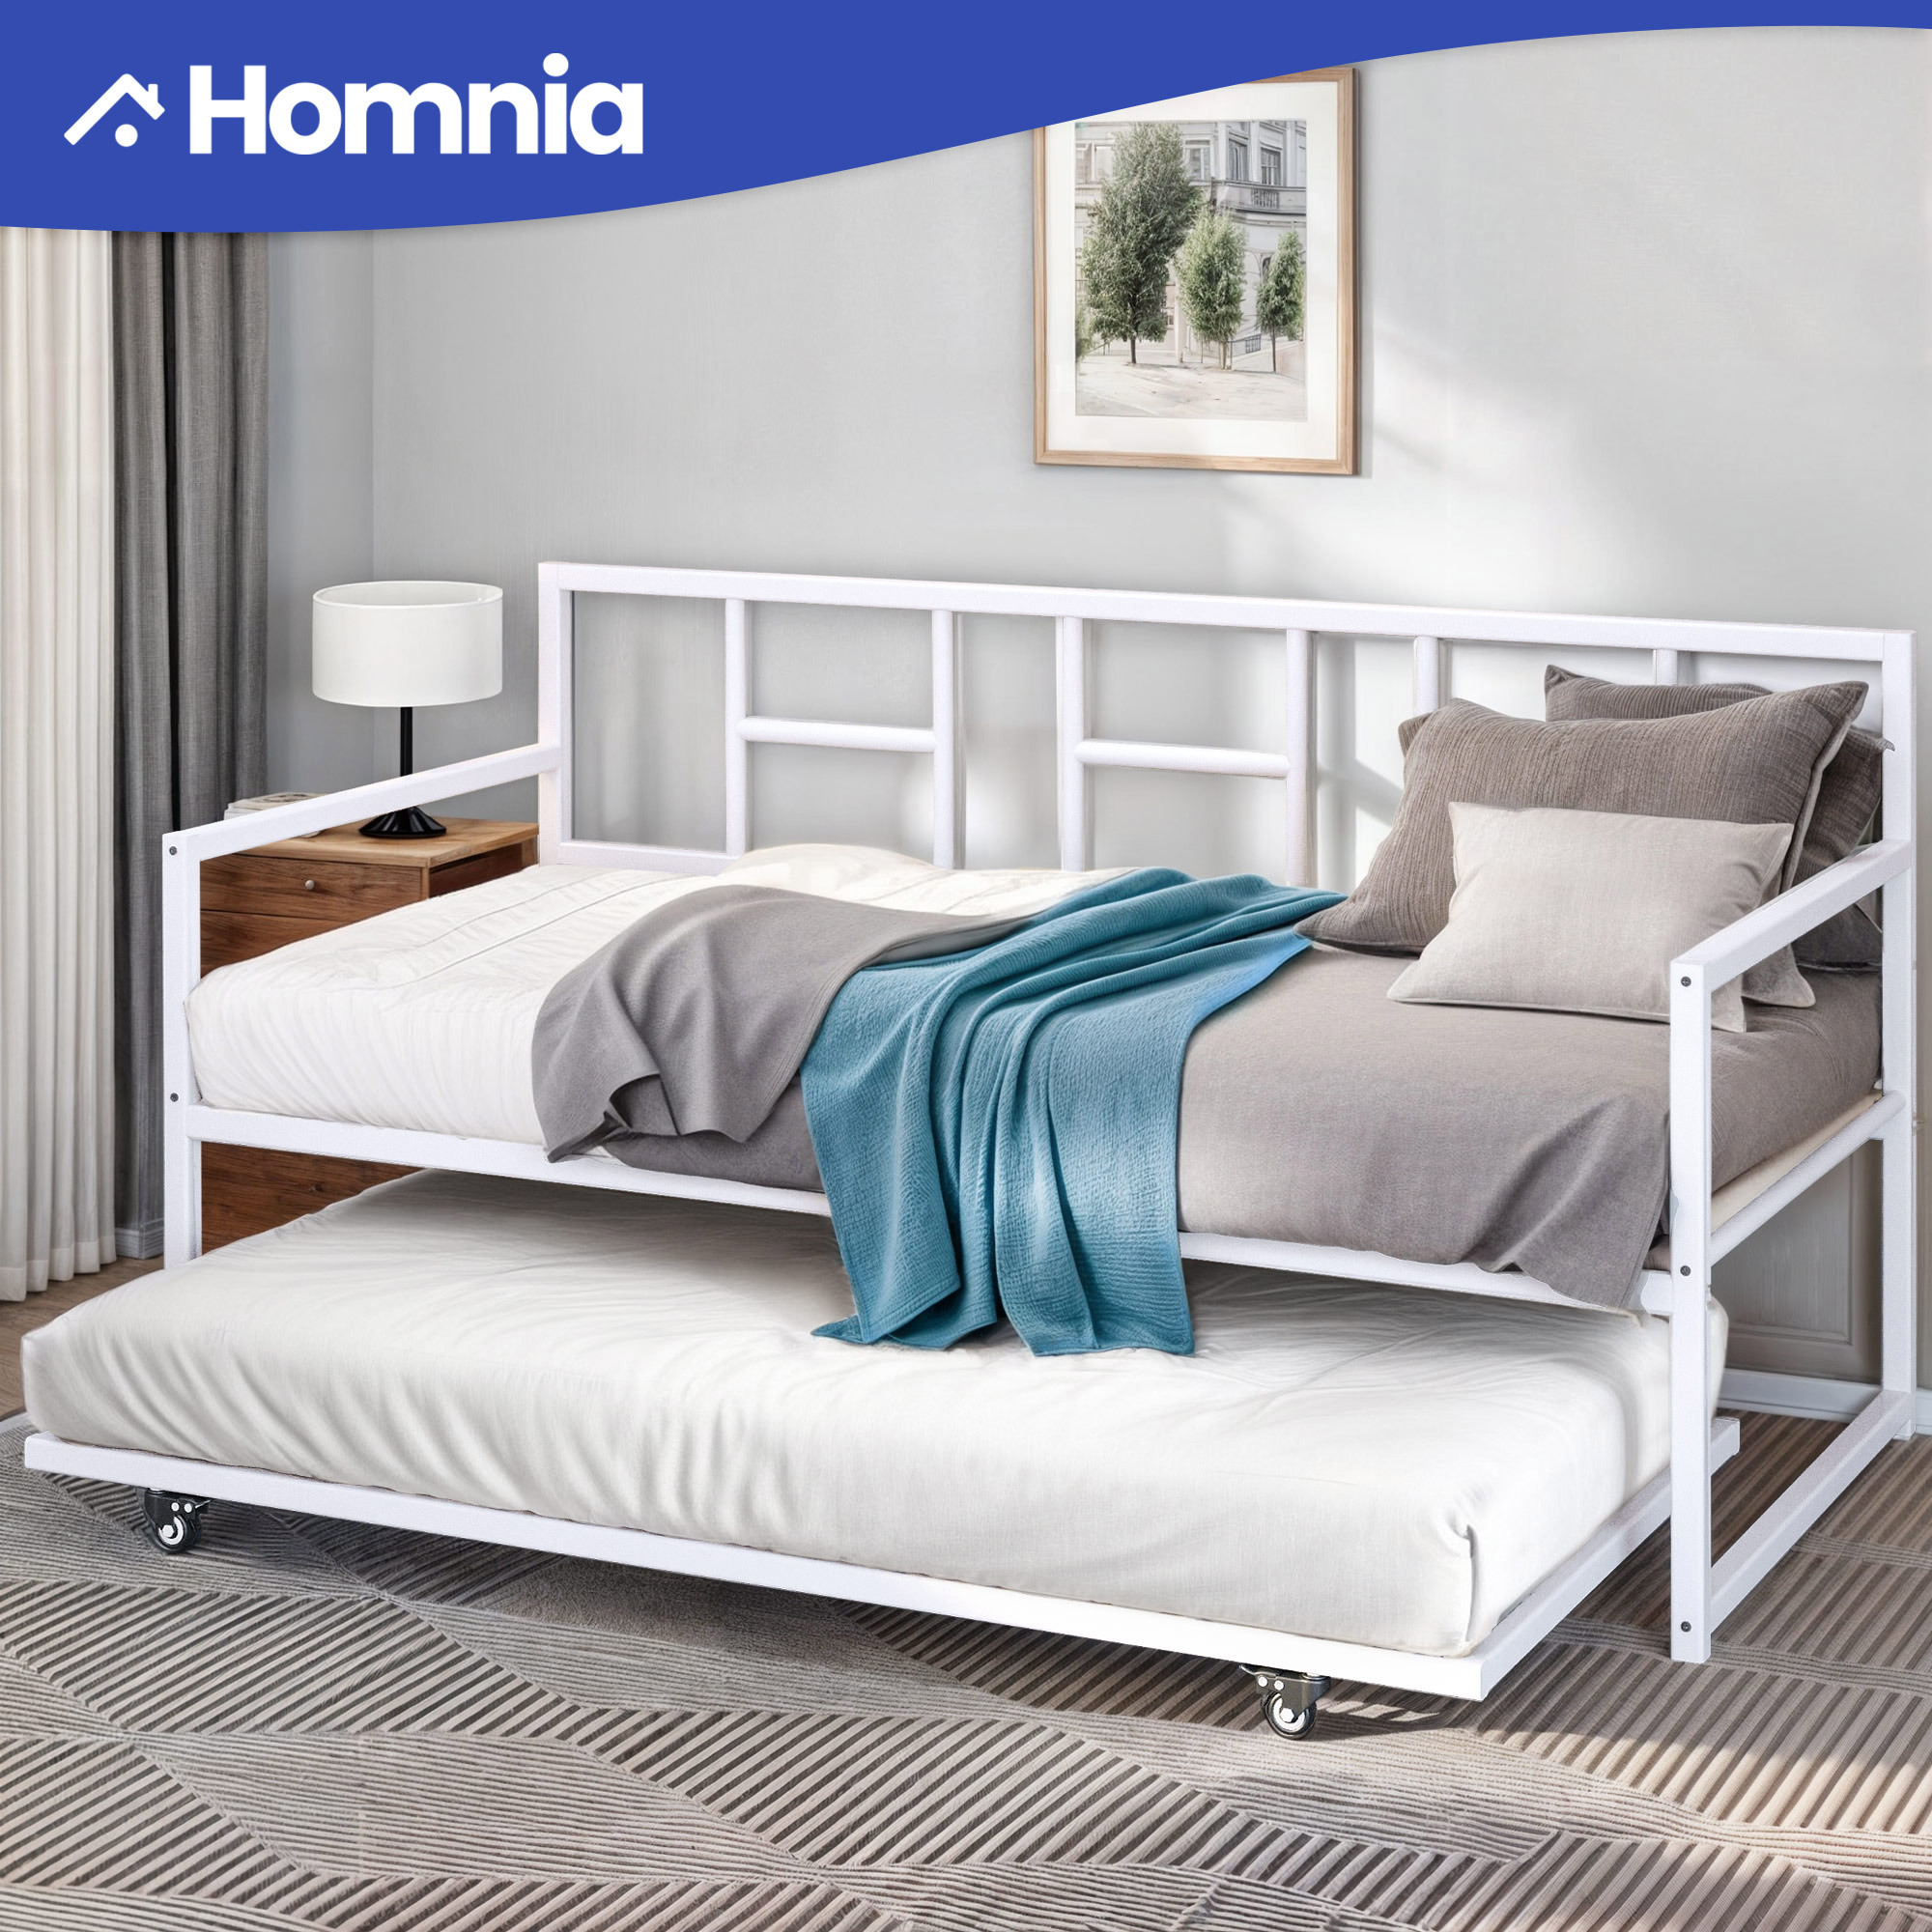 

Homnia Twin Size Trundle Pull Out Bed Frame W/ 360 Degrees Casters Wheel Adjustable Bed